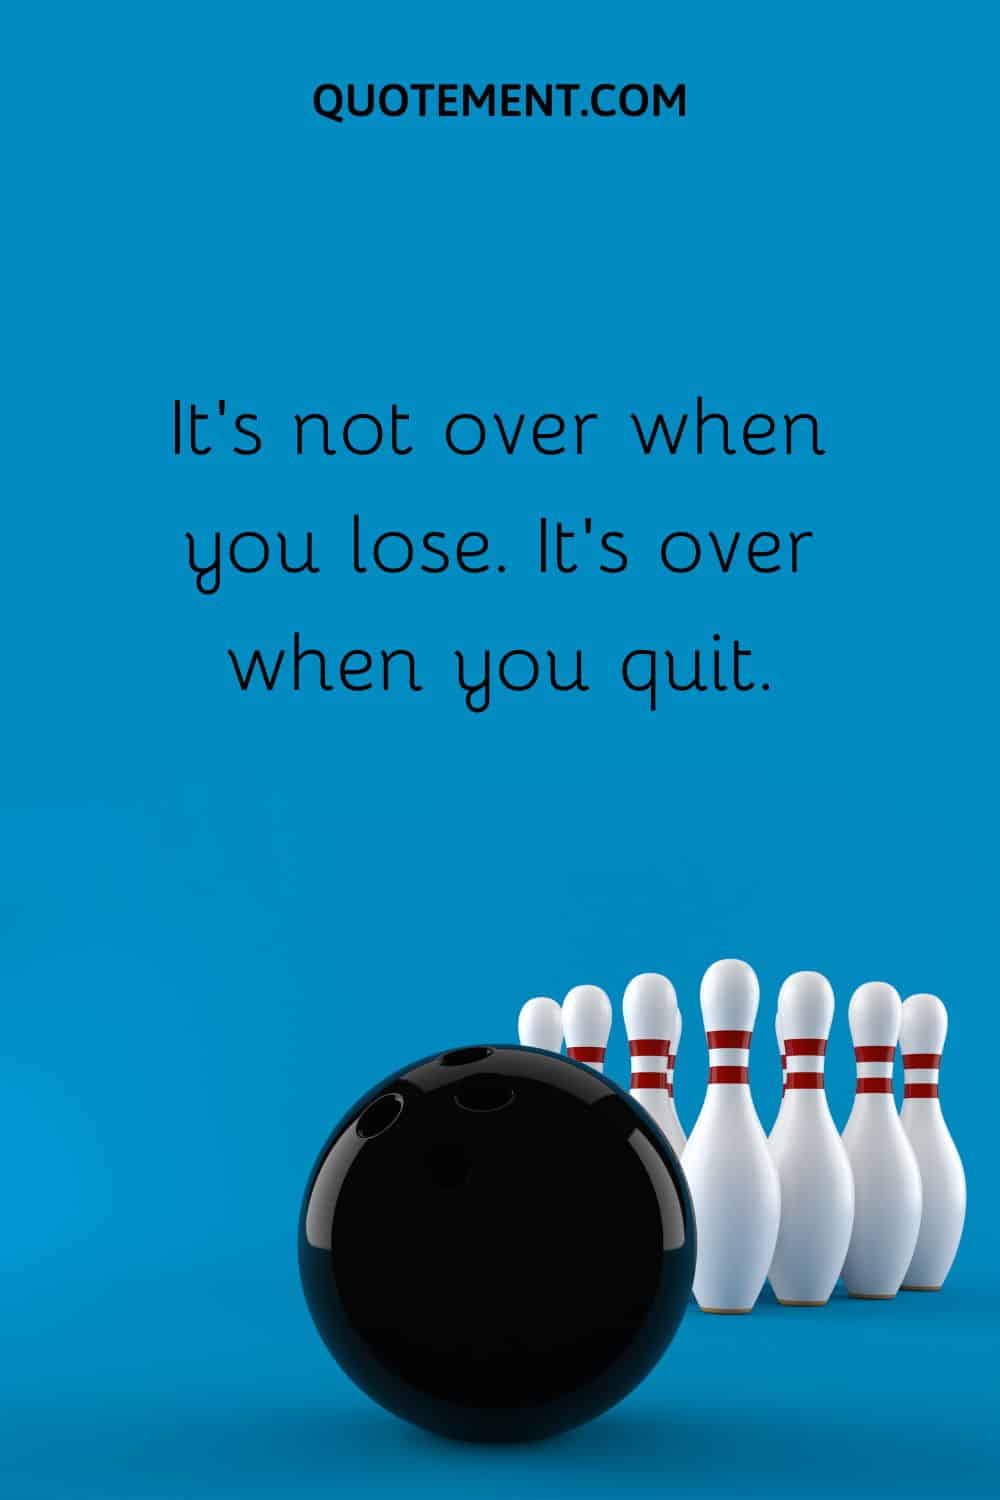 It’s not over when you lose. It’s over when you quit